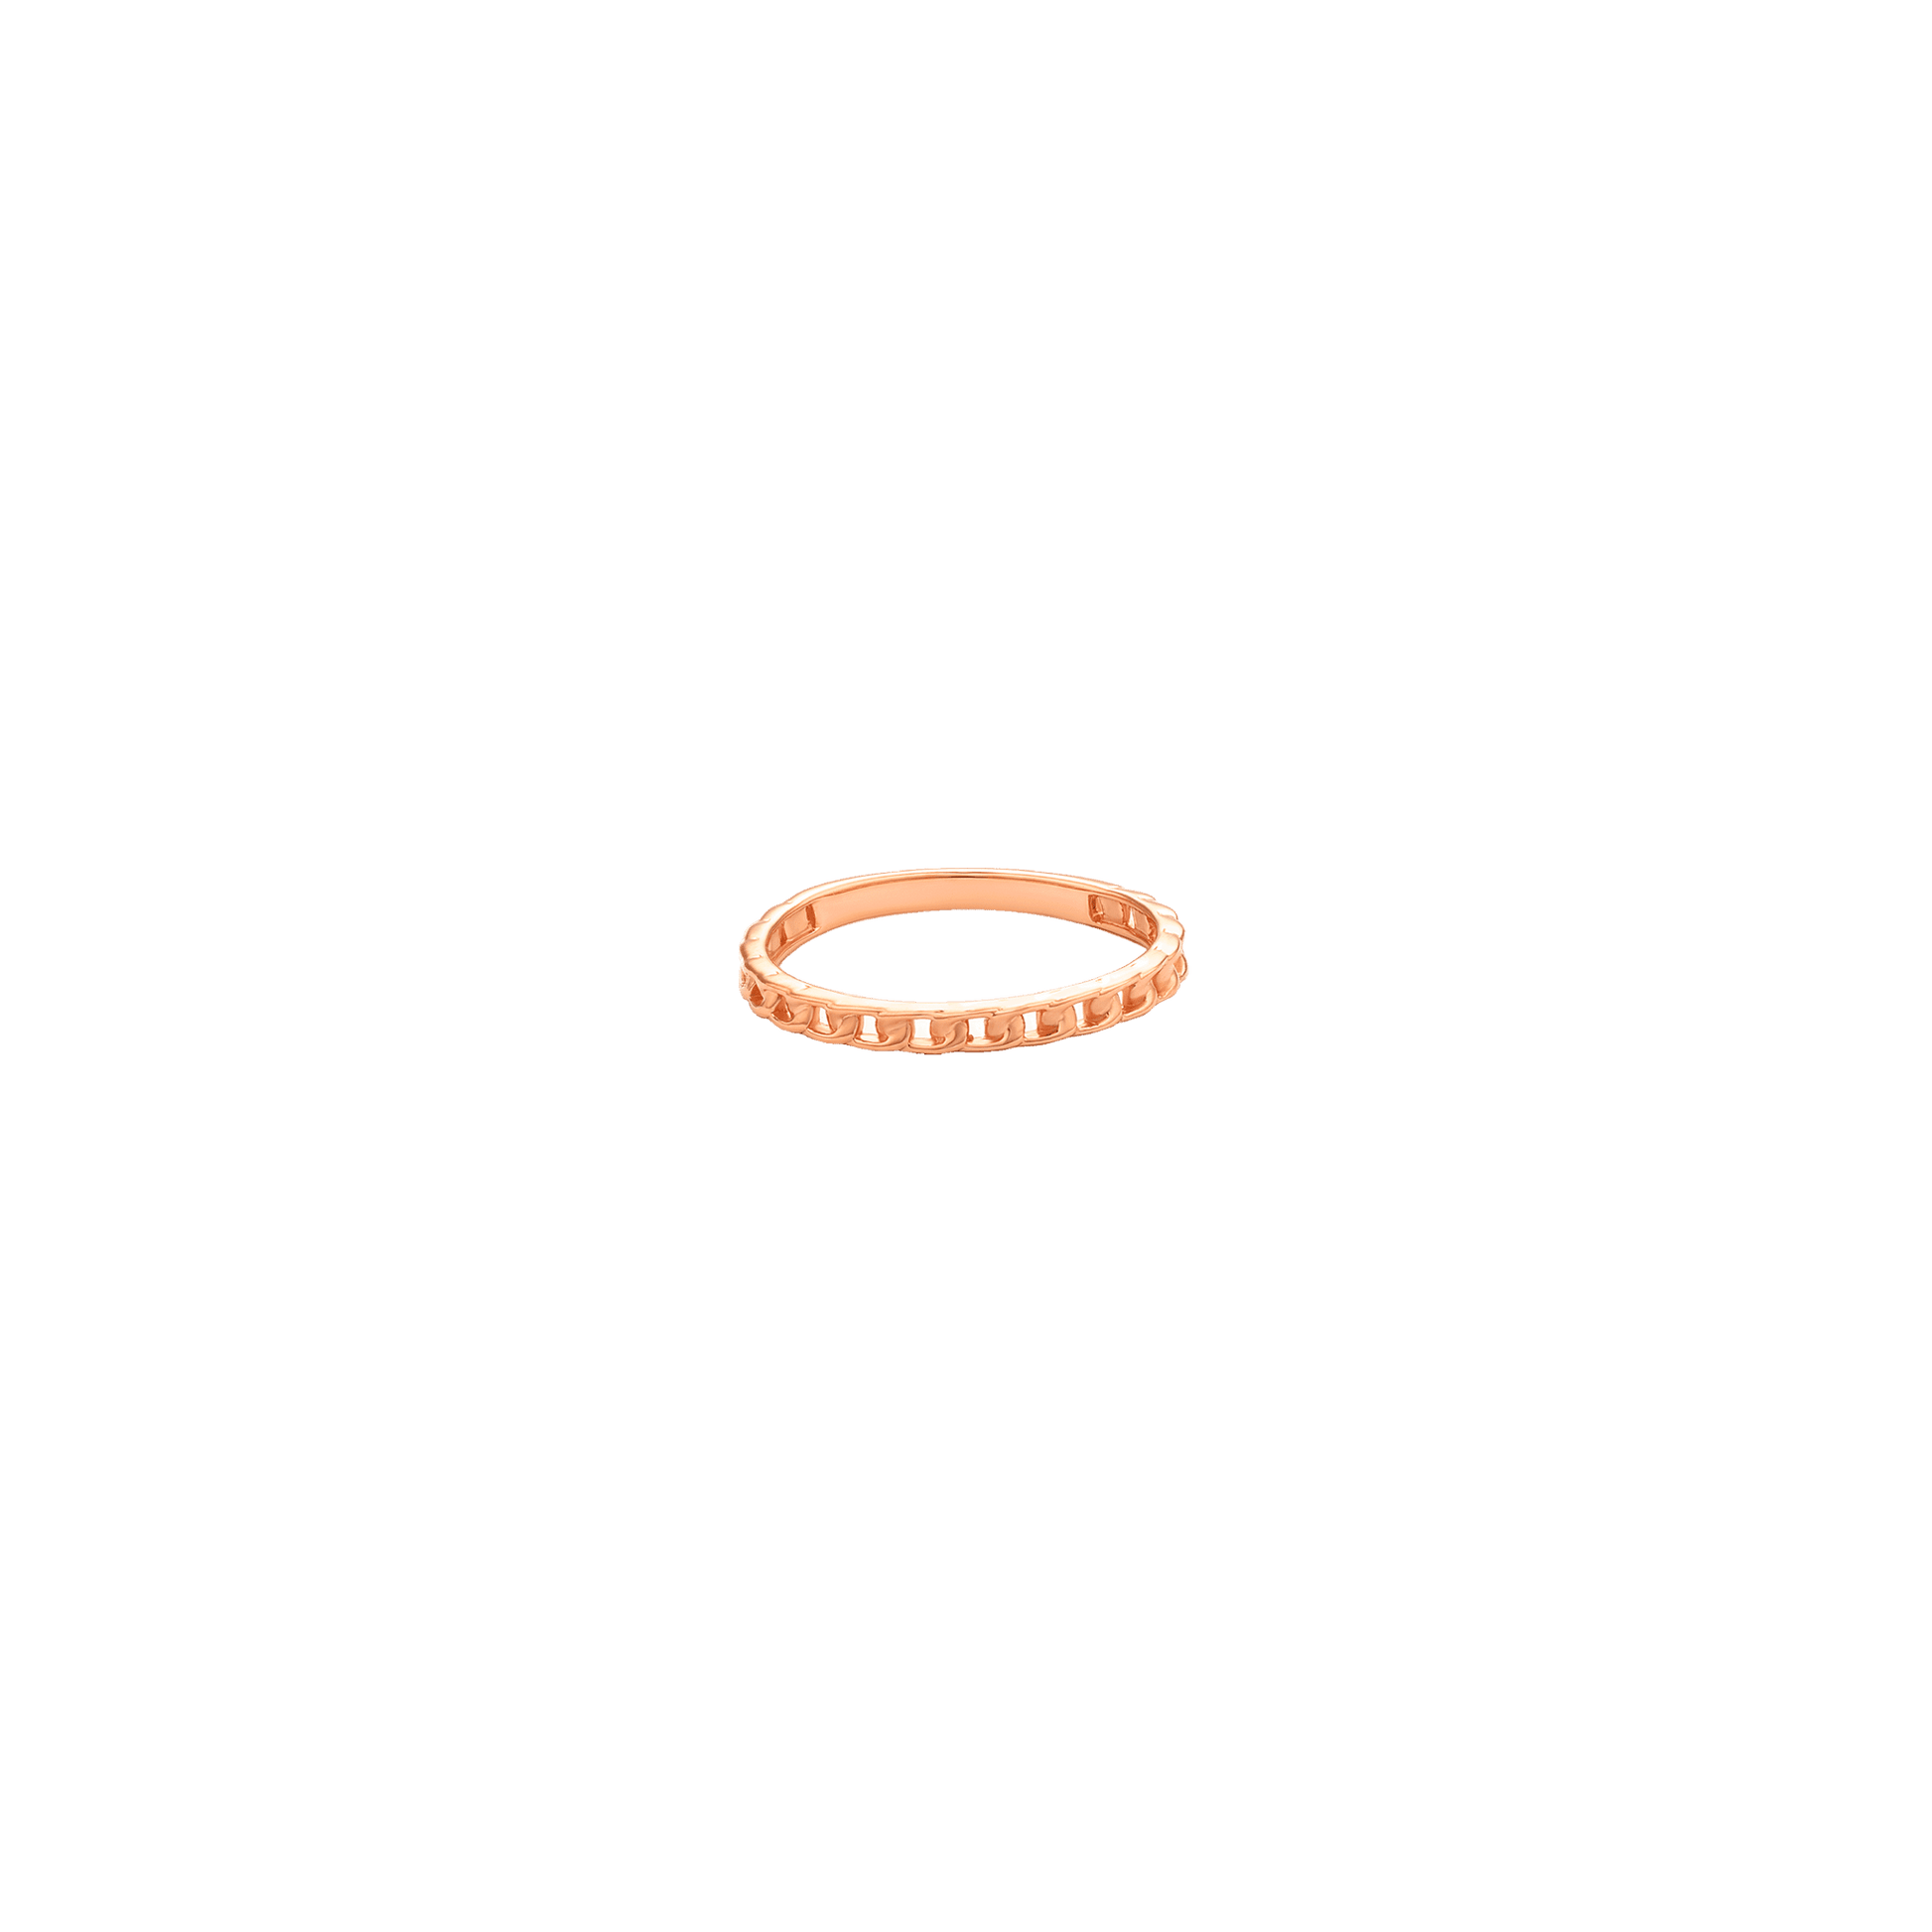 Solid Chain Ring - 14K Rose Gold Rings 14K Solid Gold US 4 